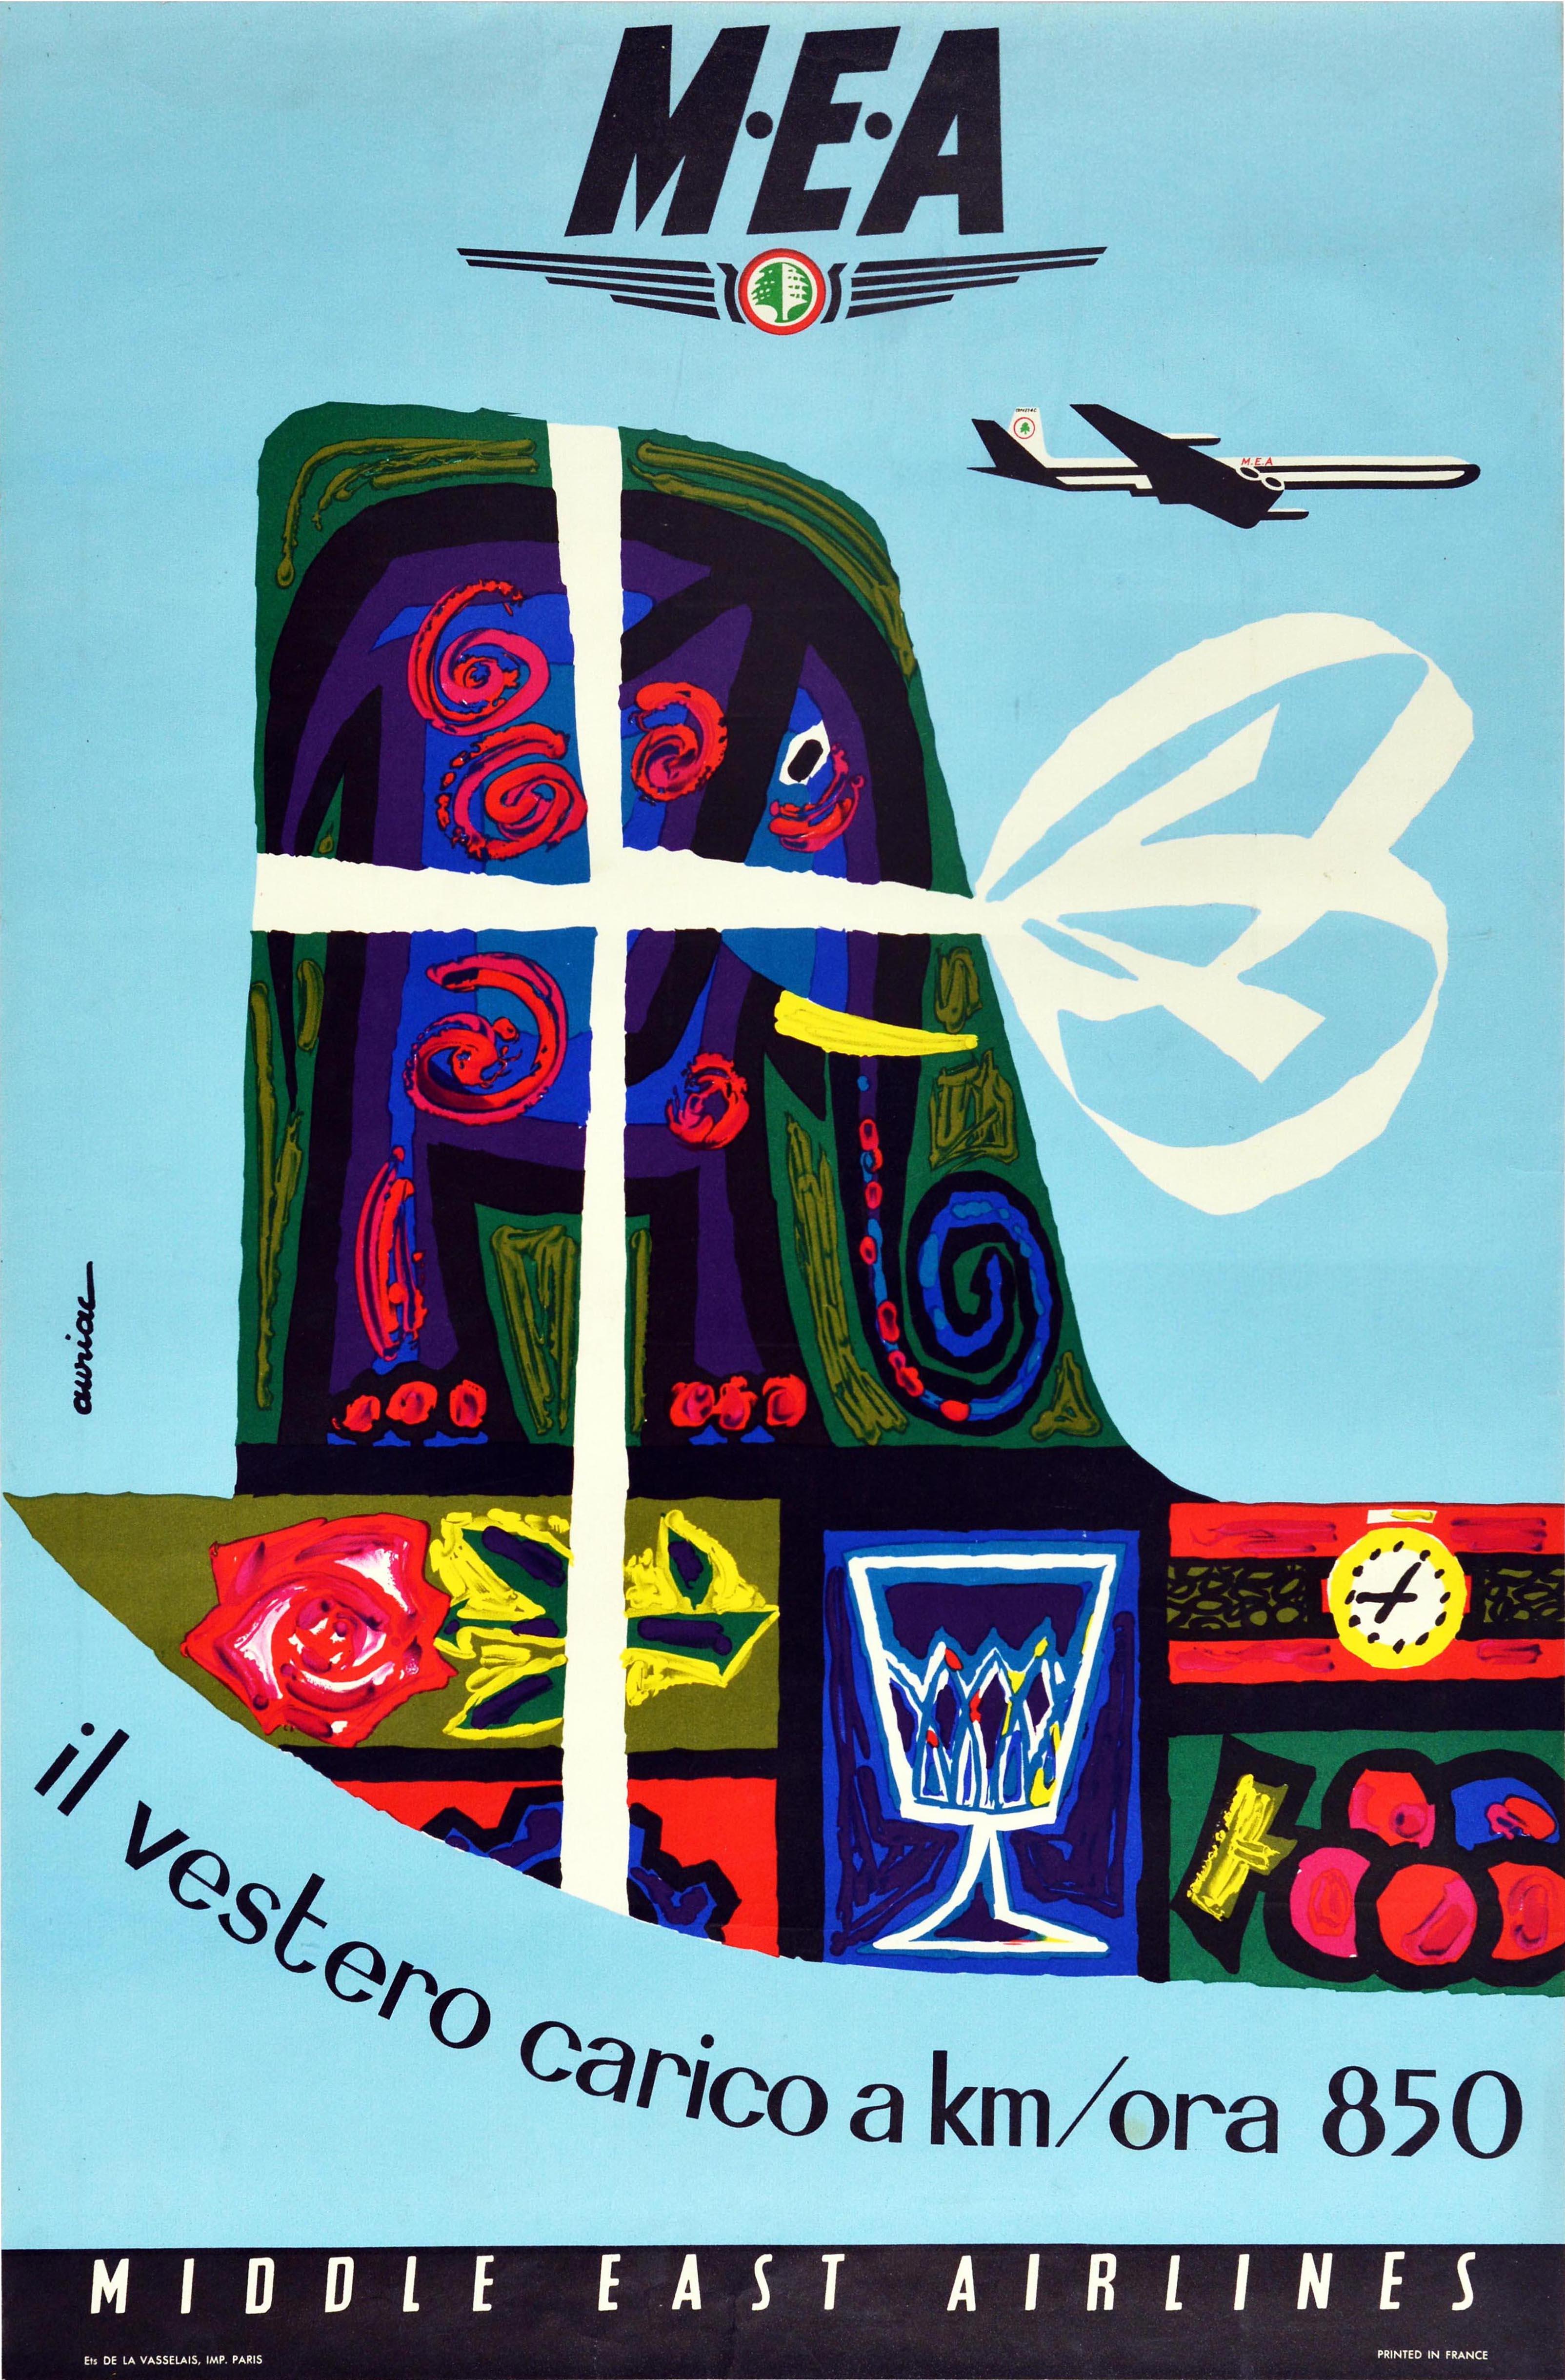 Original vintage advertising poster for Middle East airlines MEA featuring a colourful design by Jacques Auriac (1922-2003) showing the tail of a plane wrapped up with a white ribbon like a present and filled with objects including a rose flower, a